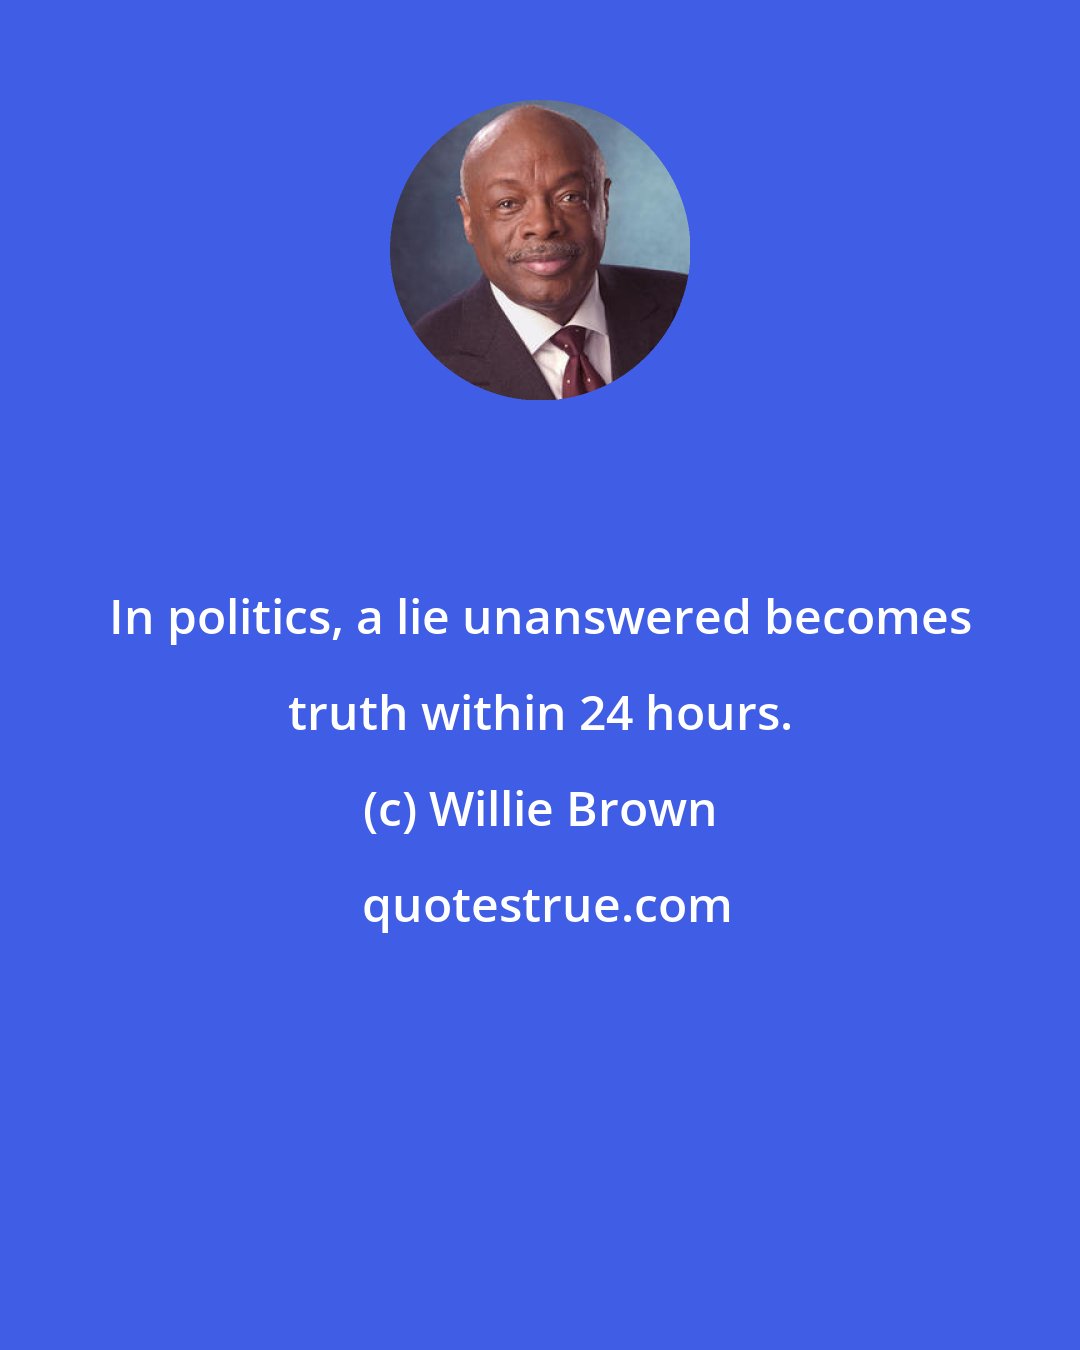 Willie Brown: In politics, a lie unanswered becomes truth within 24 hours.